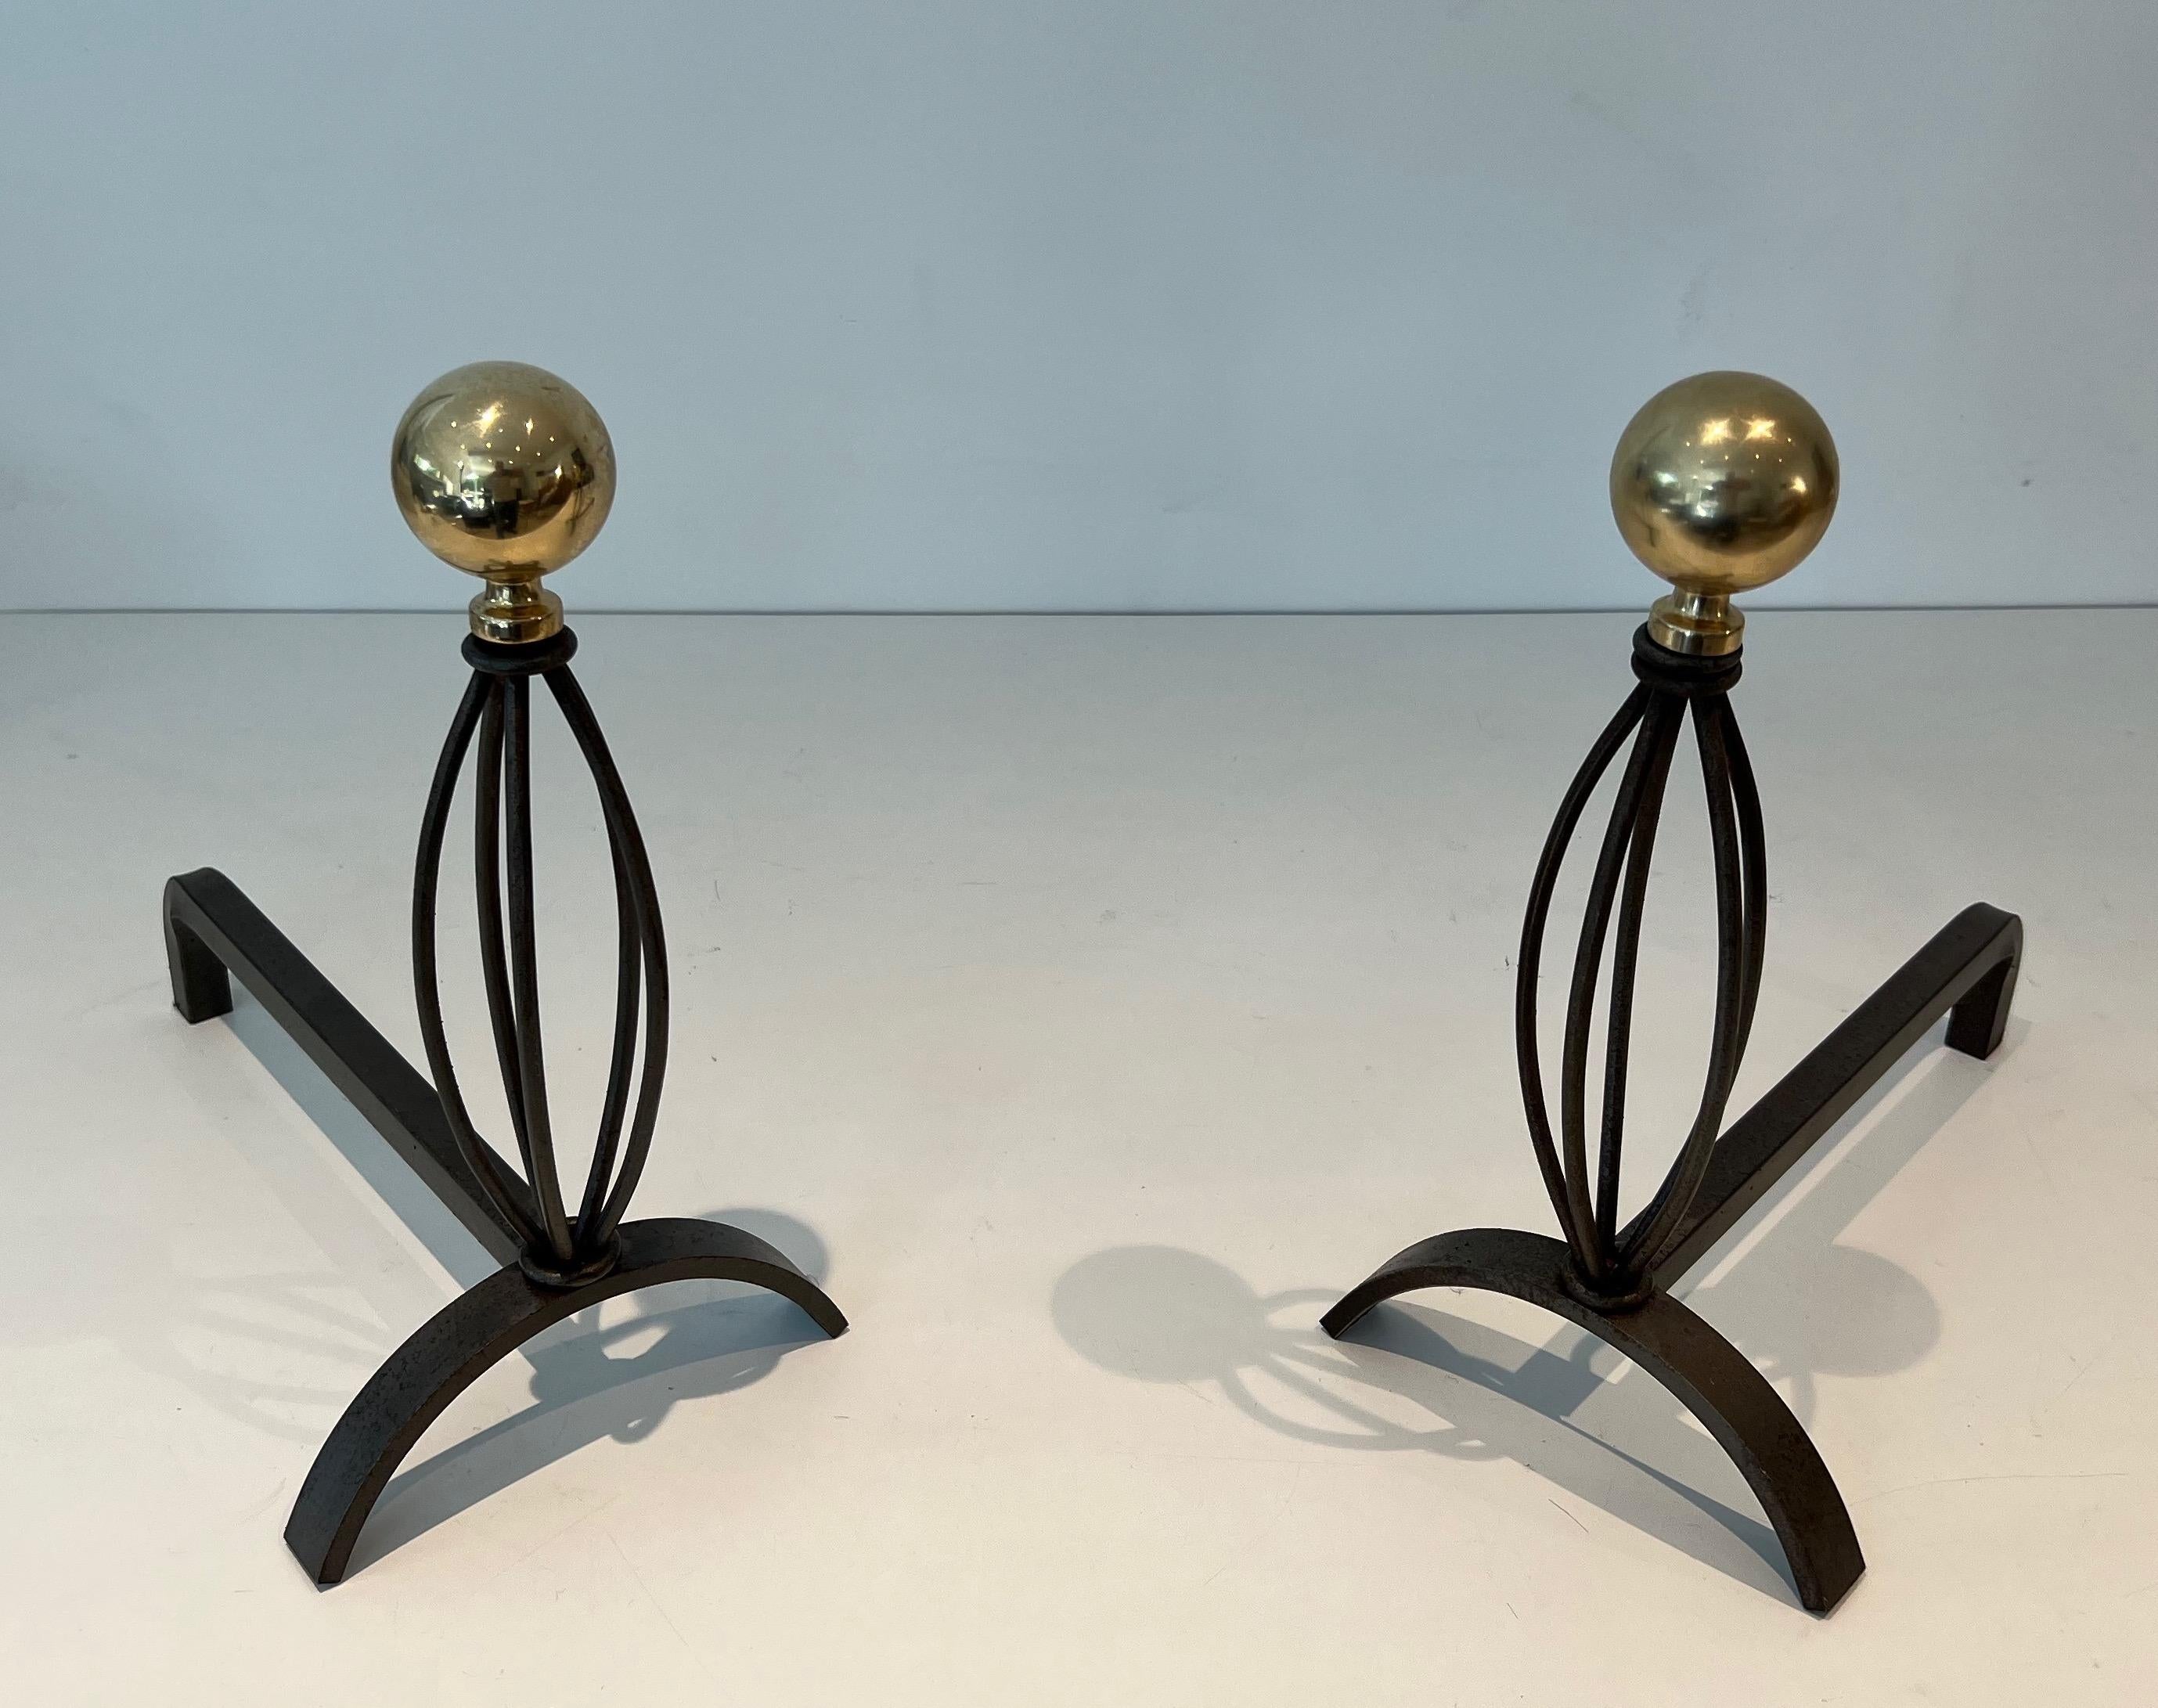 This pair of decorative andirons aere made of wrought iron and brass. This is a French work. Circa 1970